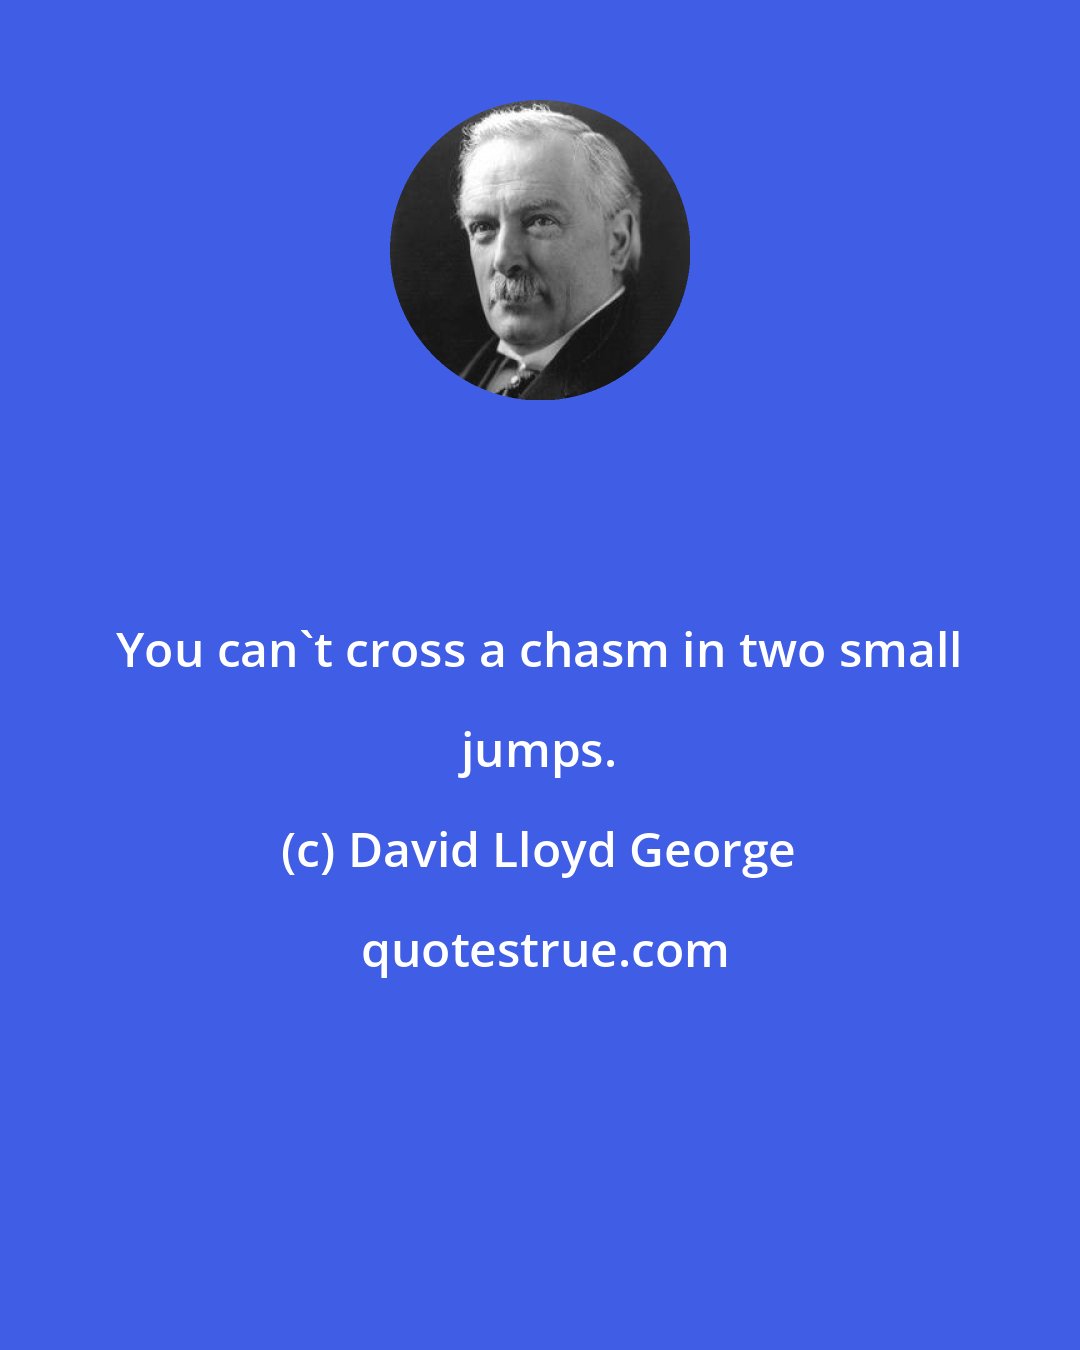 David Lloyd George: You can't cross a chasm in two small jumps.